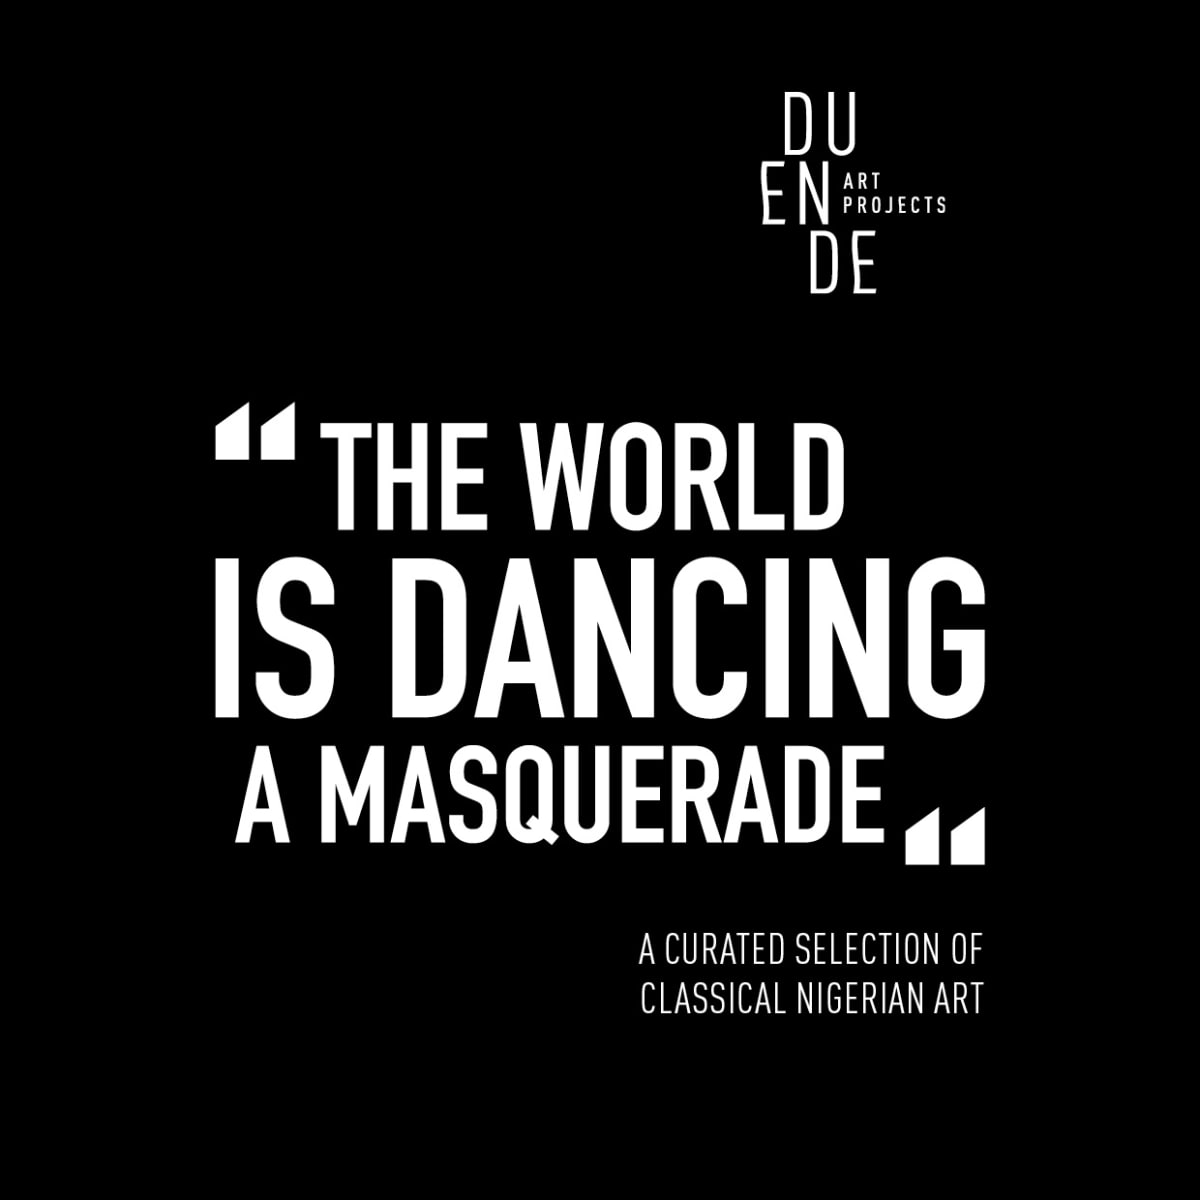 The World is Dancing a Masquerade